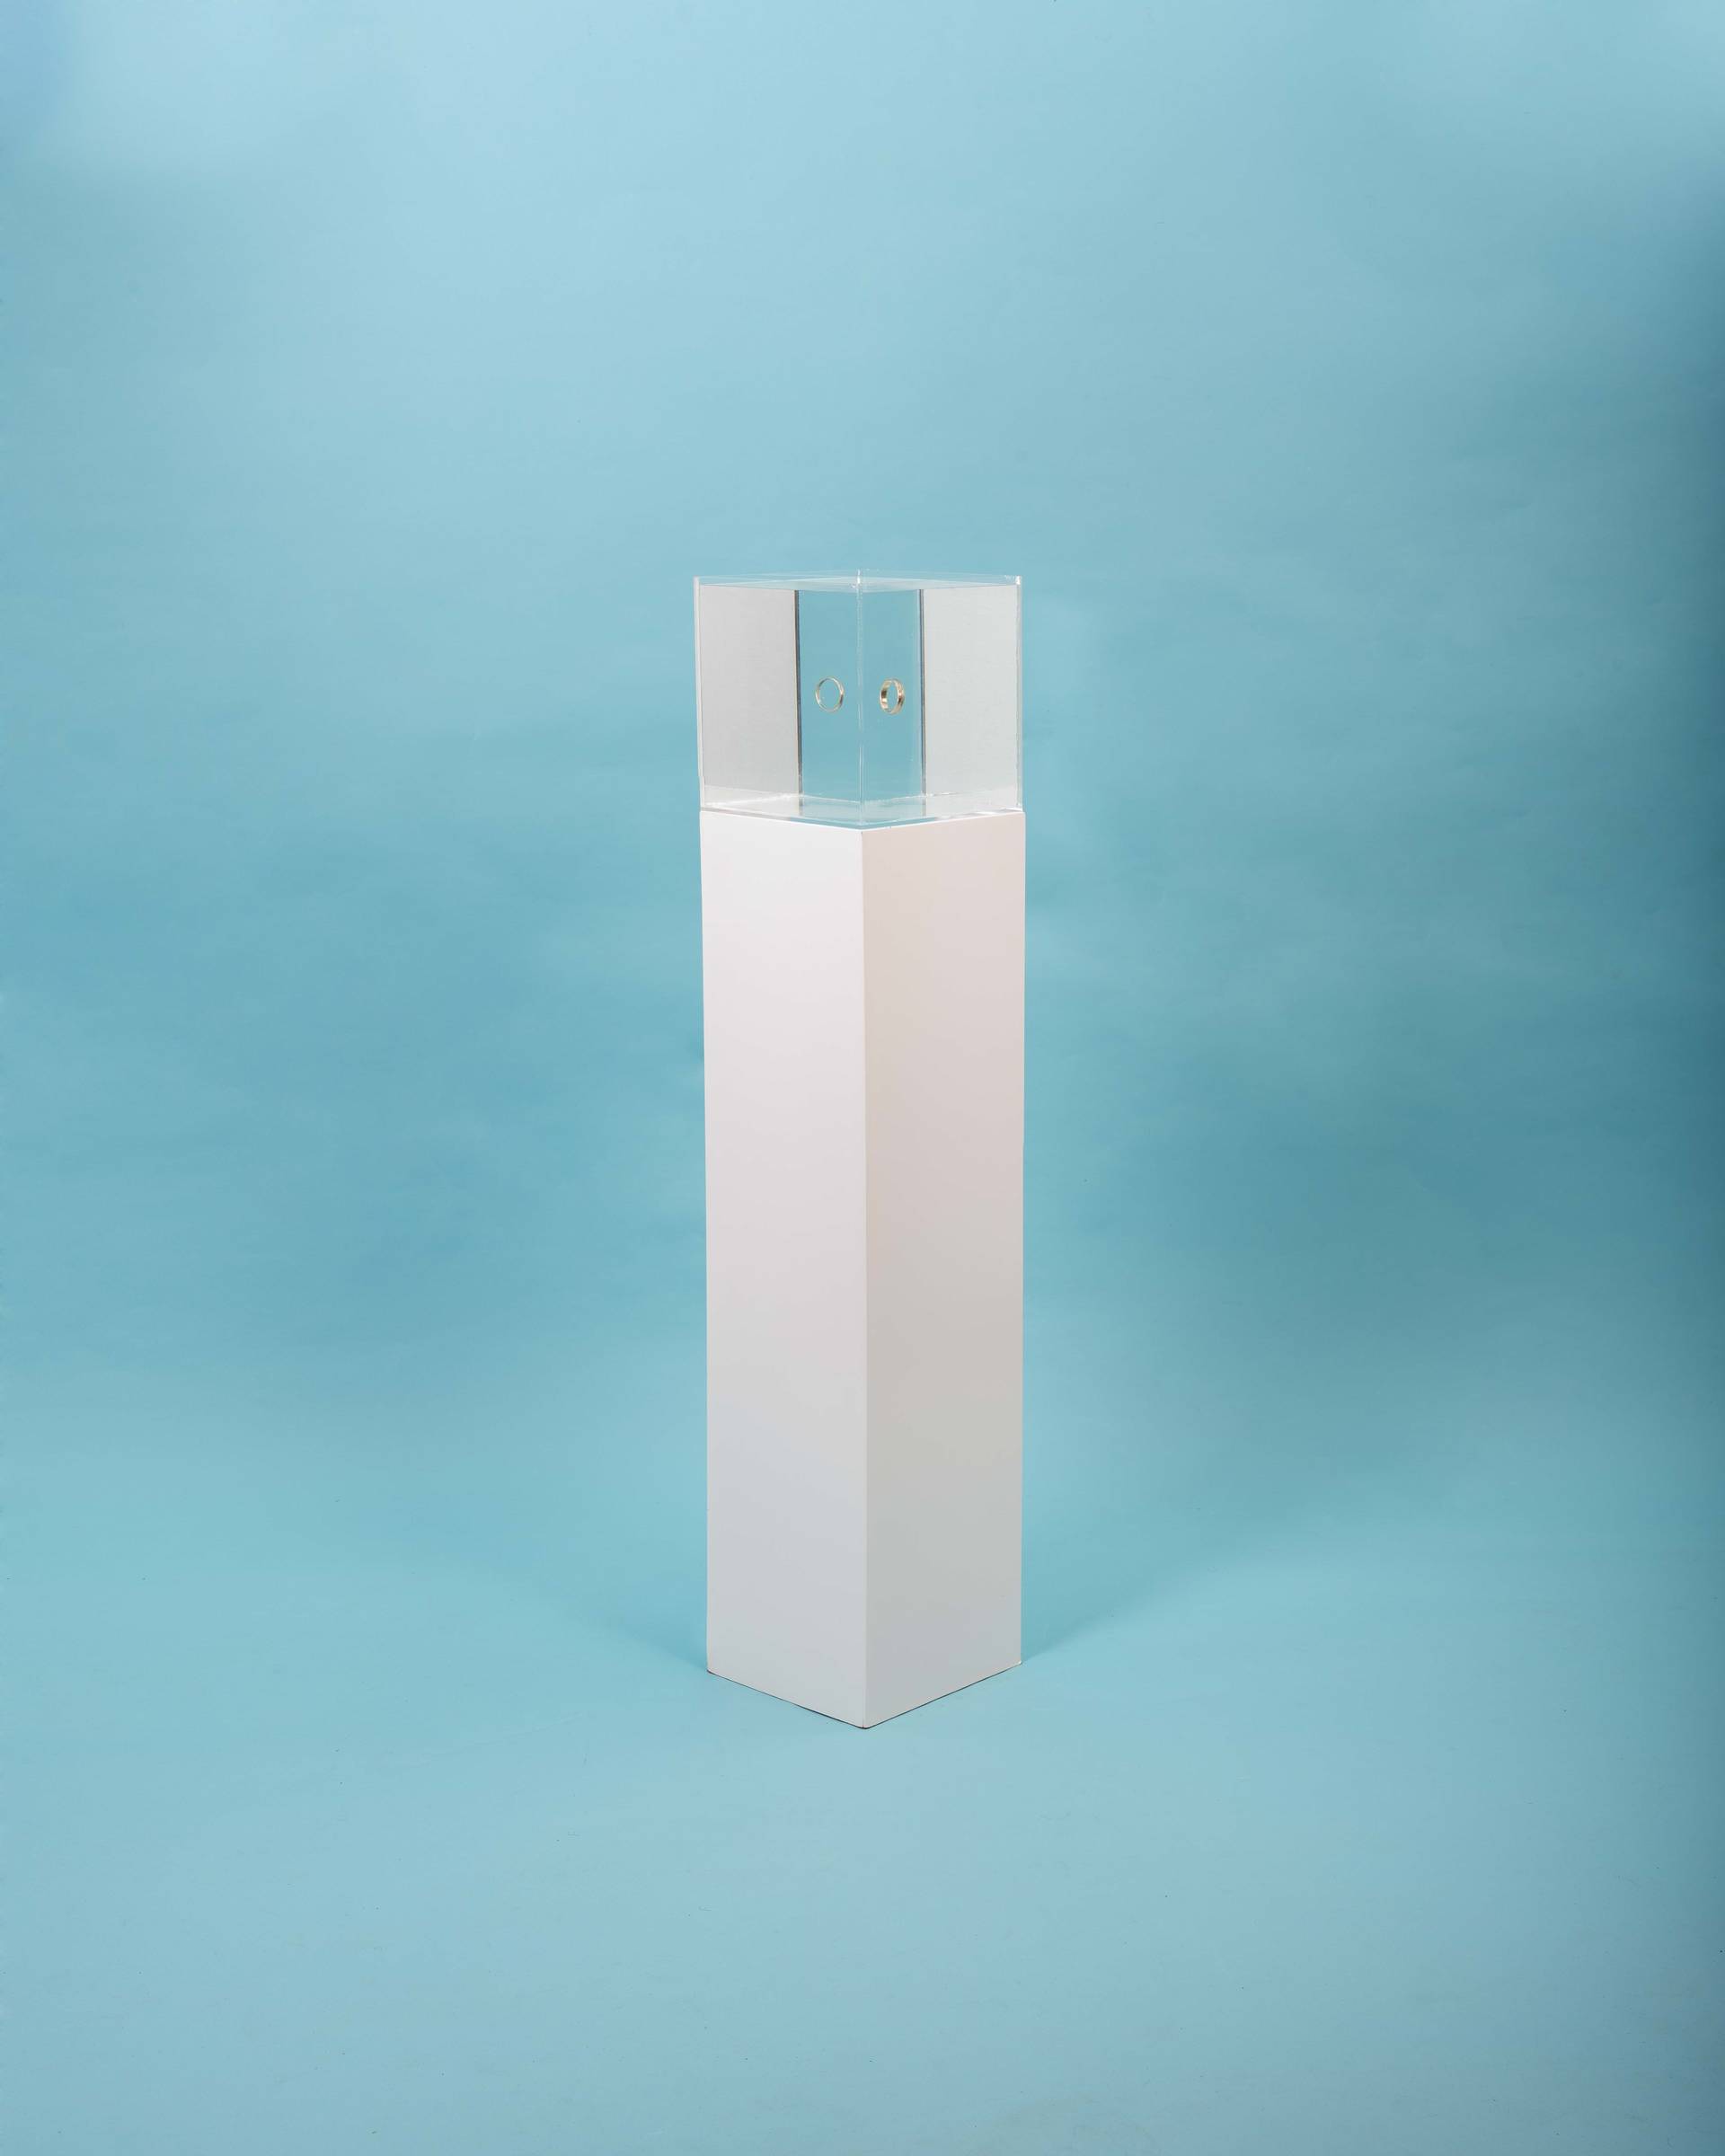 The cube of water on a plinth highlights how we tend to try and mould nature inorganically.